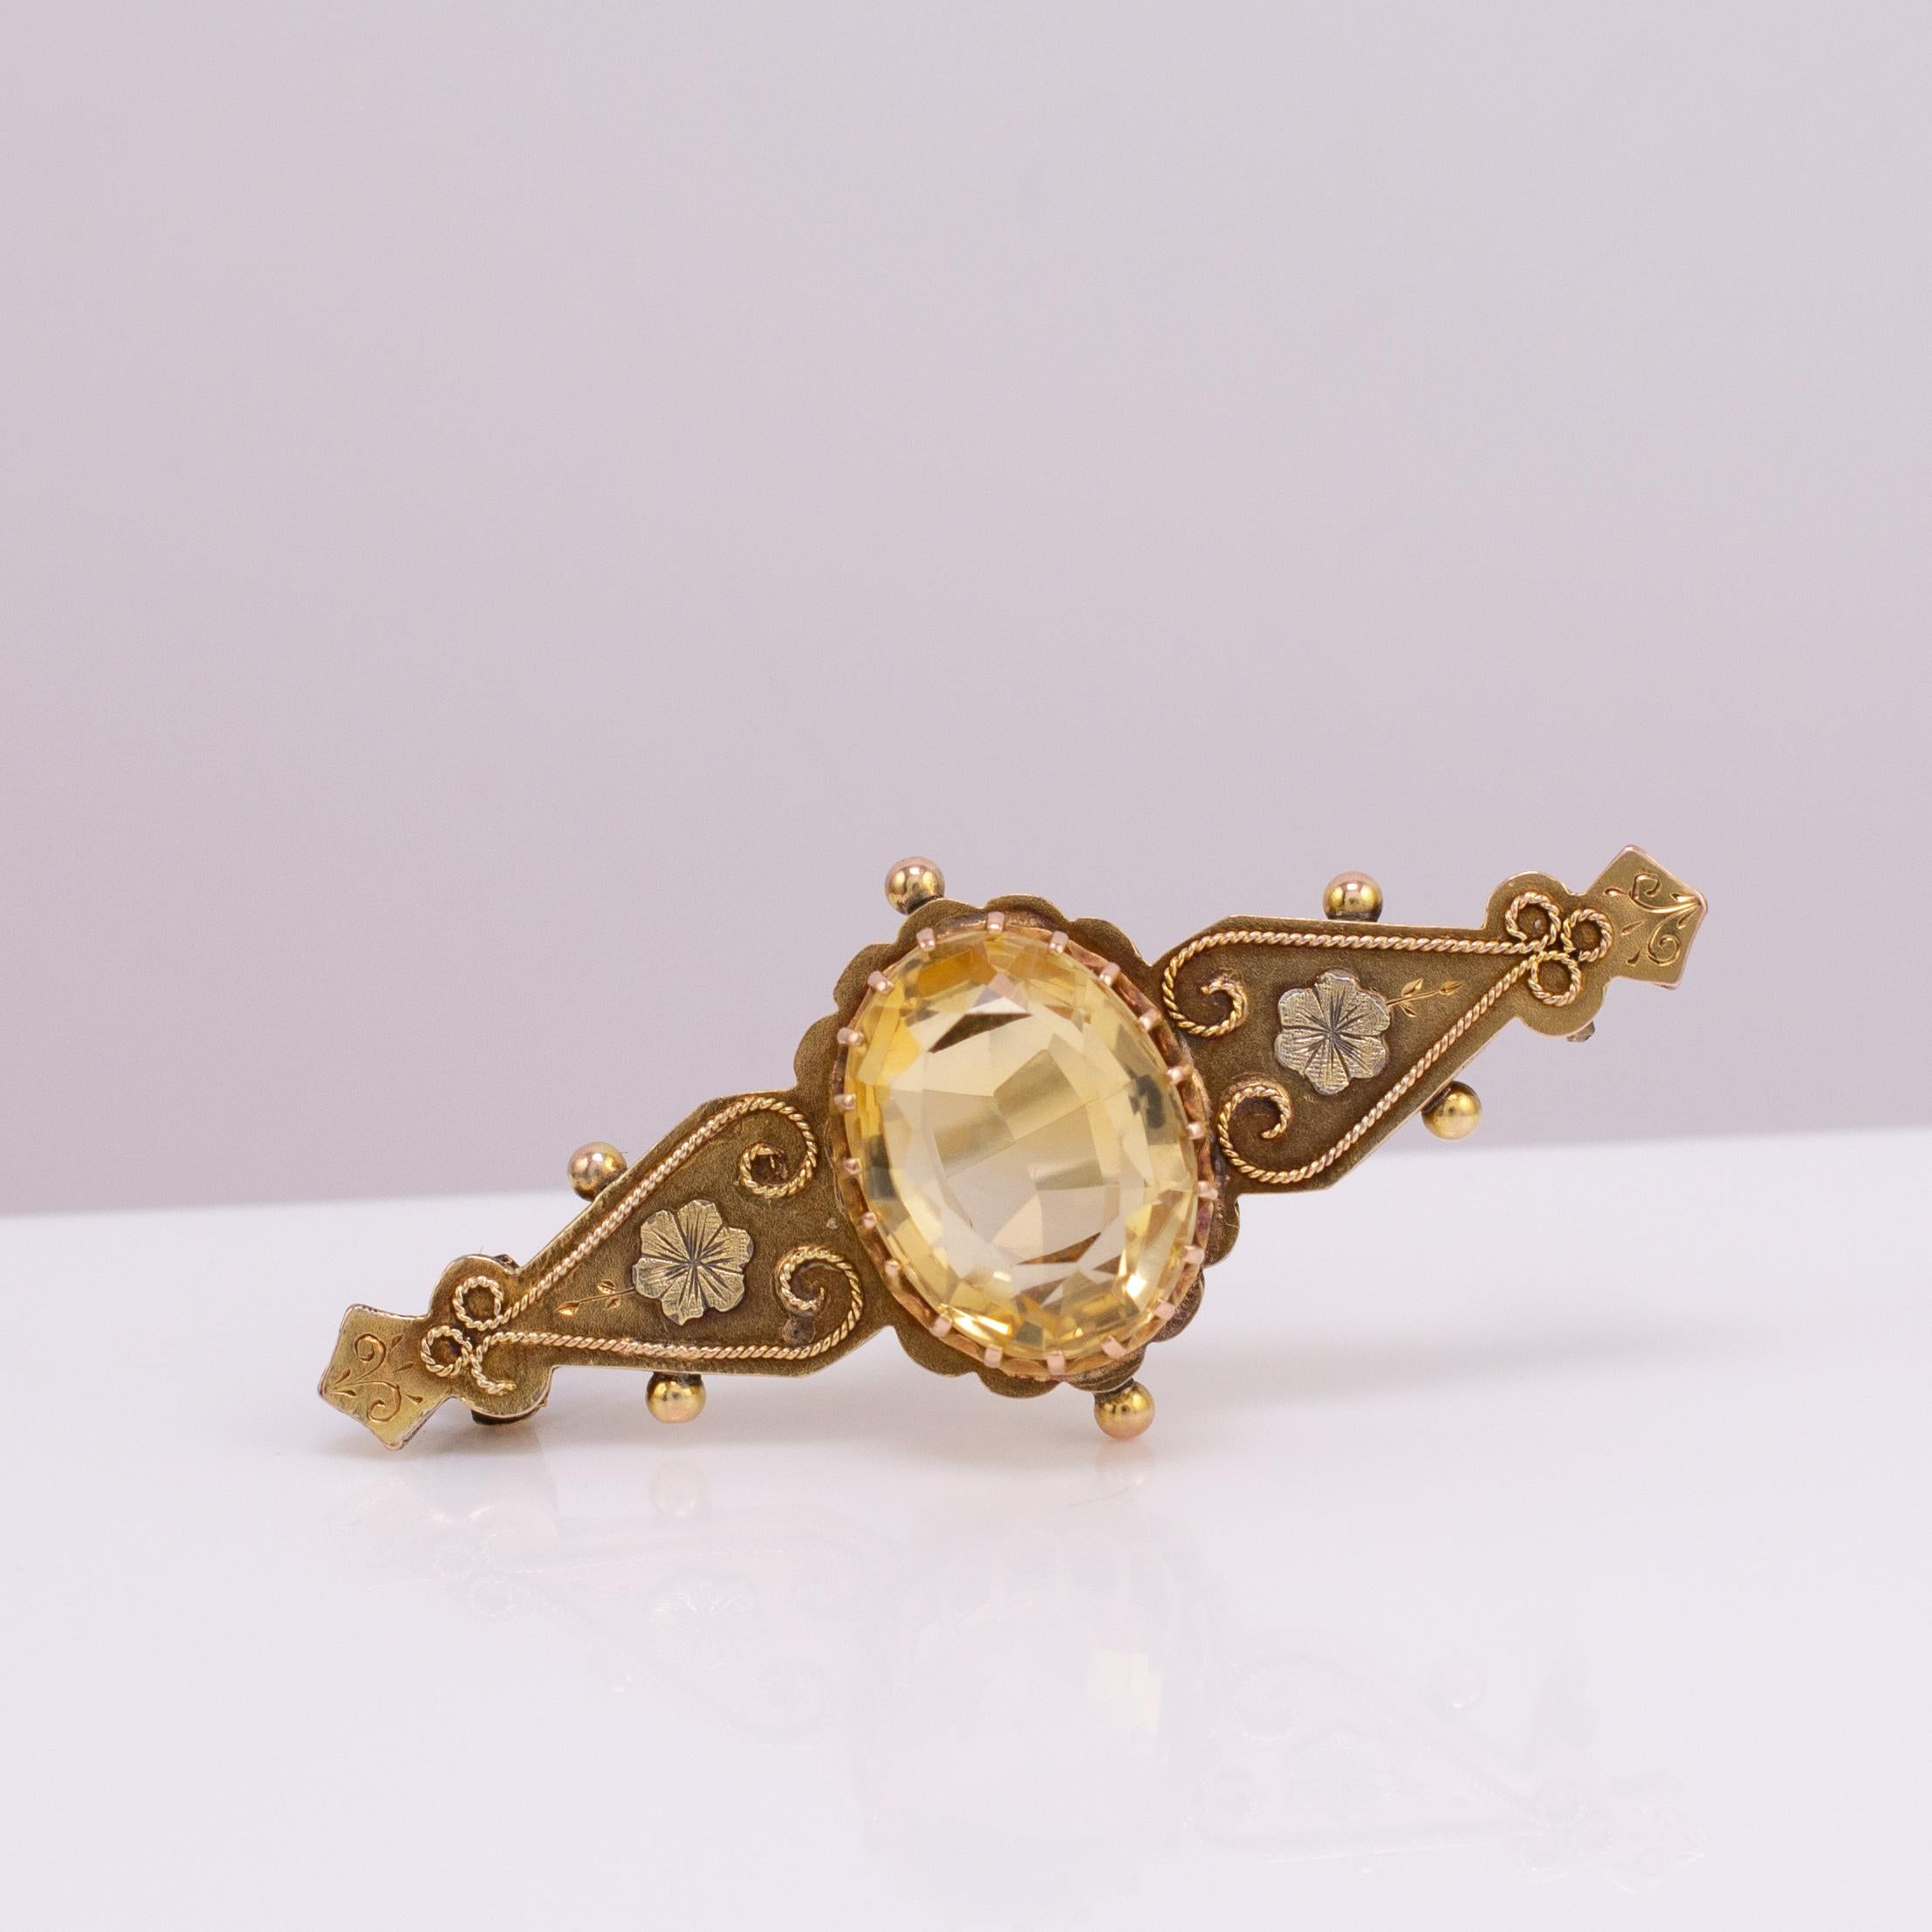 Women's Antique Victorian Citrine Brooch with Cannetille Flowers Dated 1886 For Sale